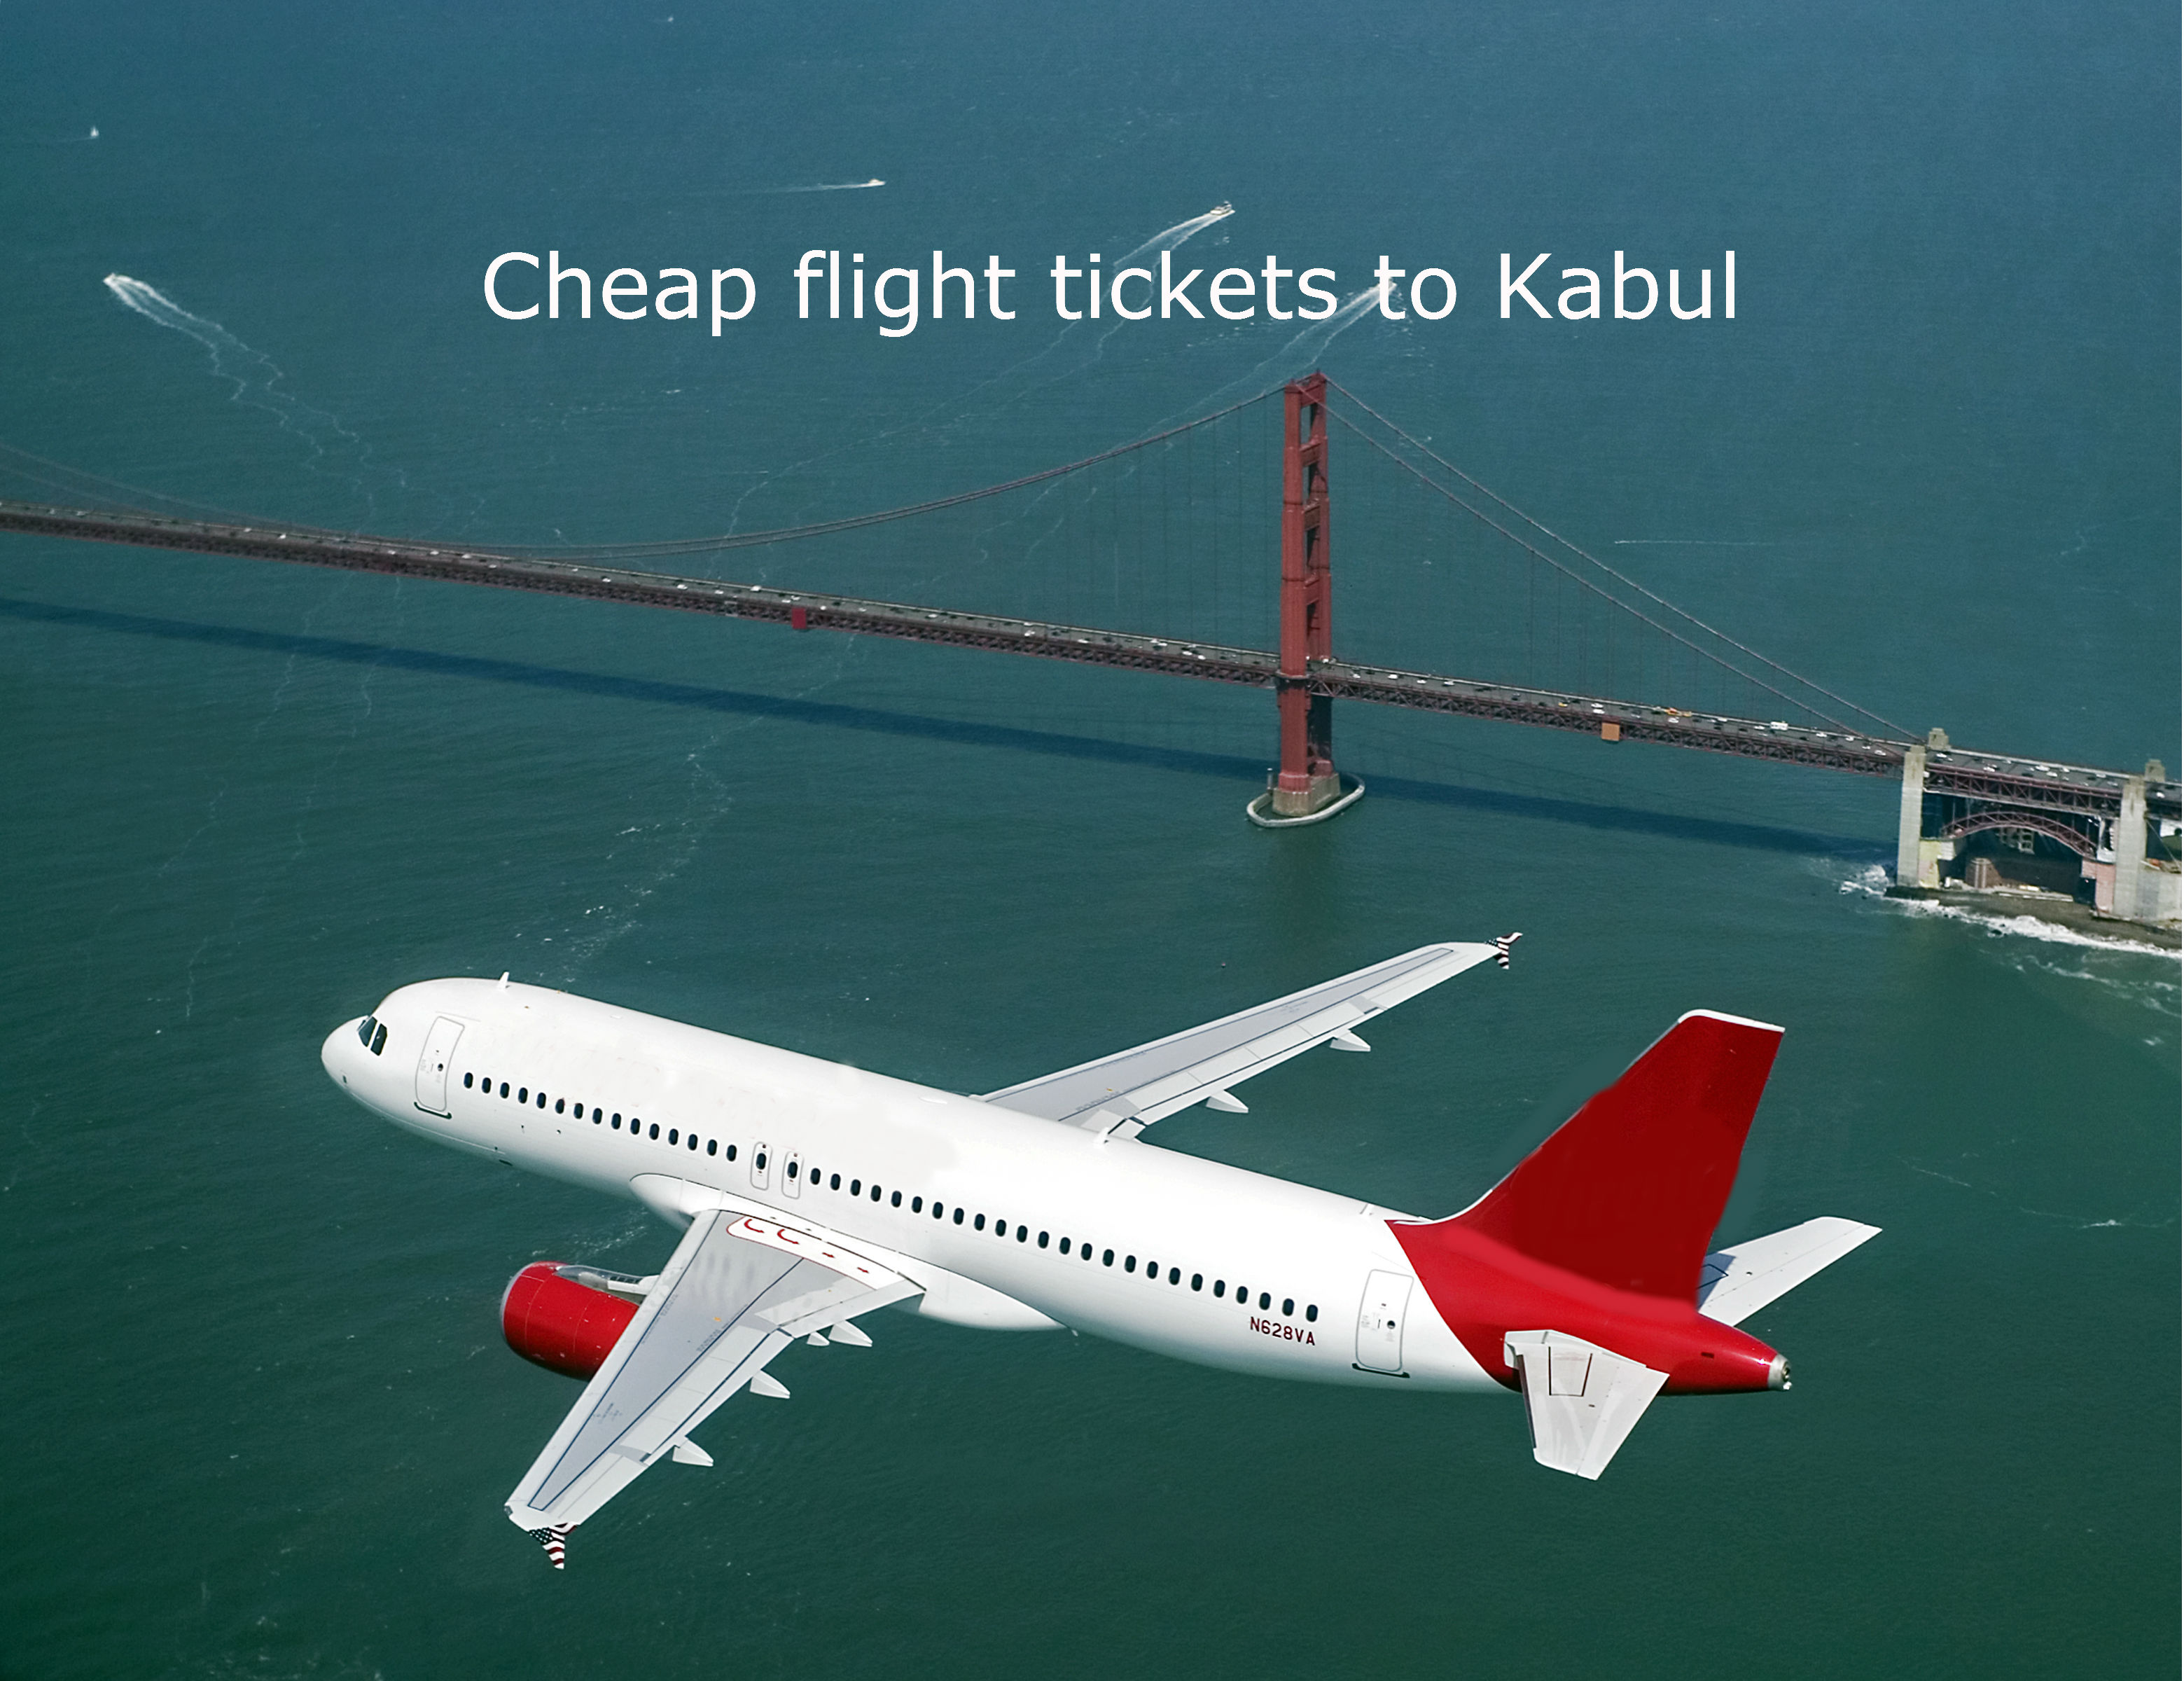 Buy cheap flight tickets to Kabul online from